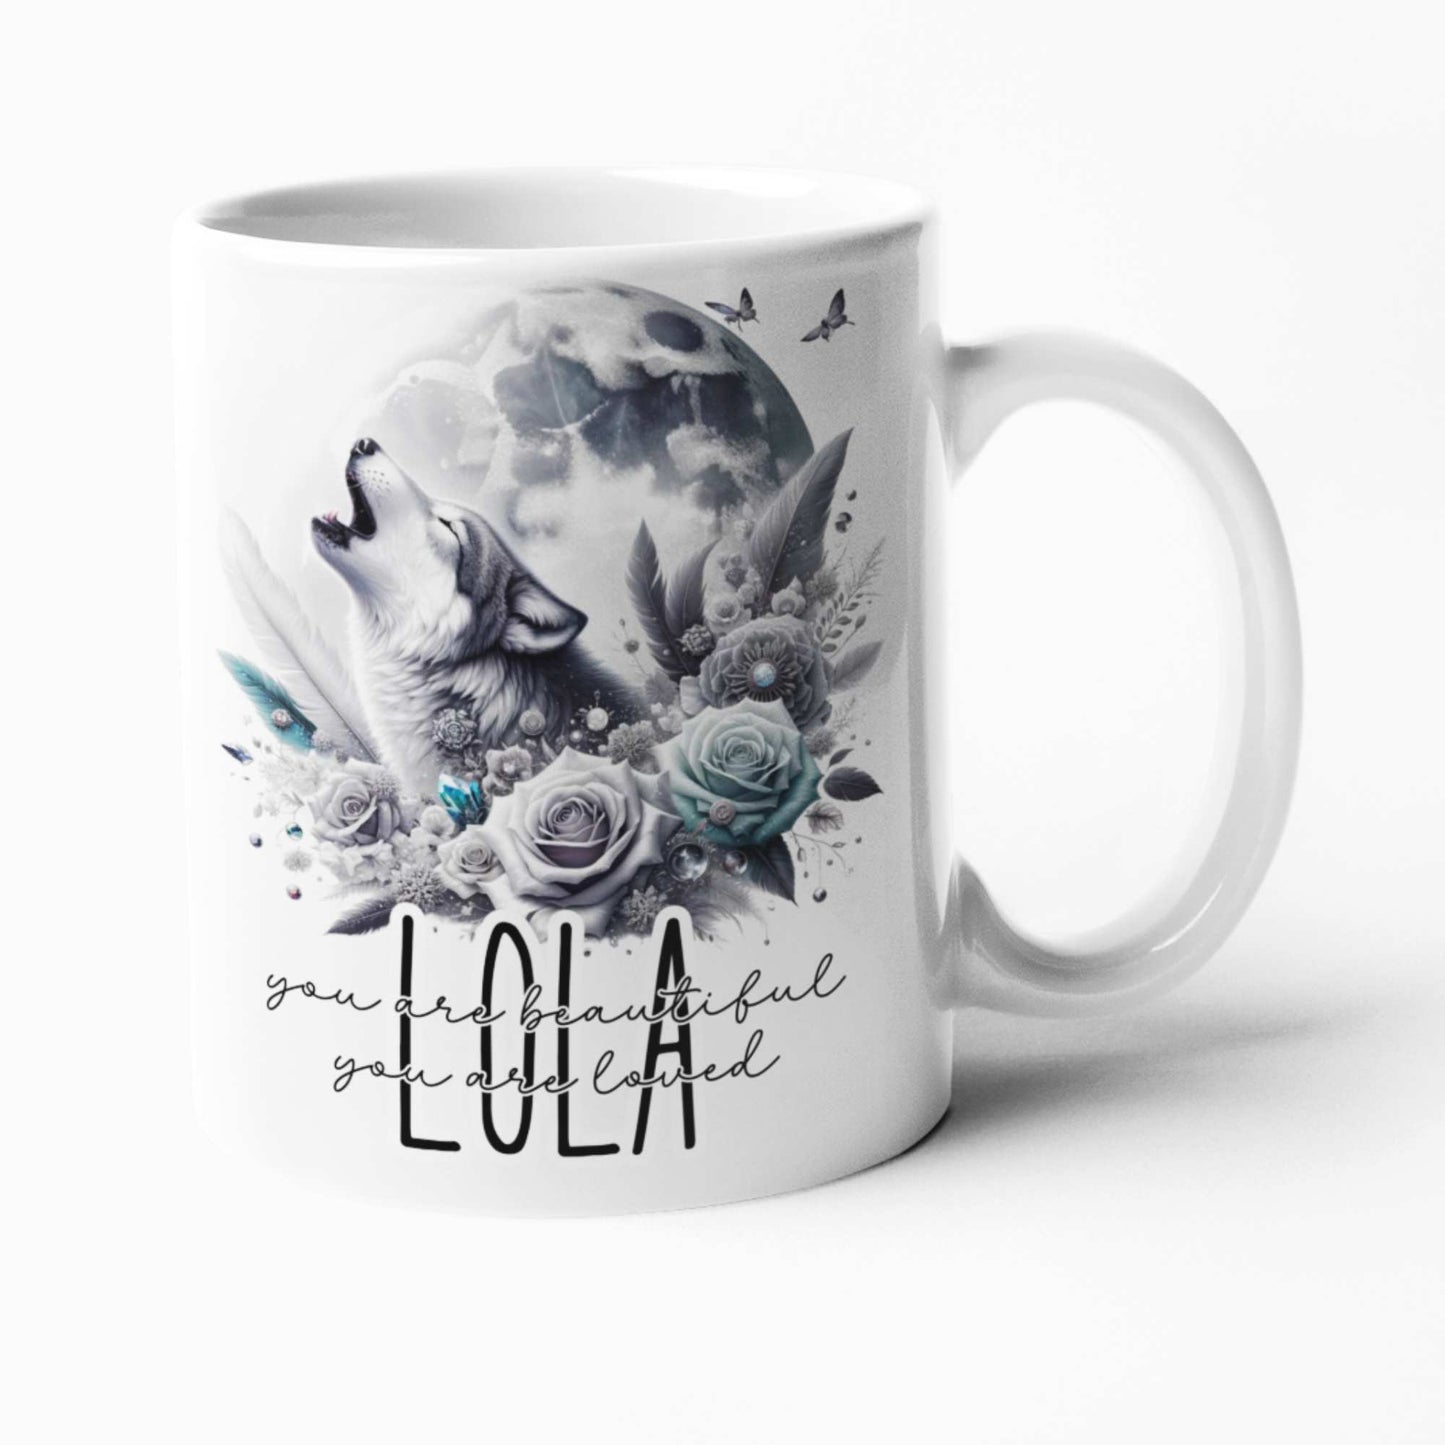 Wolf & Moon Themed Drinkware: Customisable Mugs & Tumblers - Enchanting Gifts for Nature Lovers